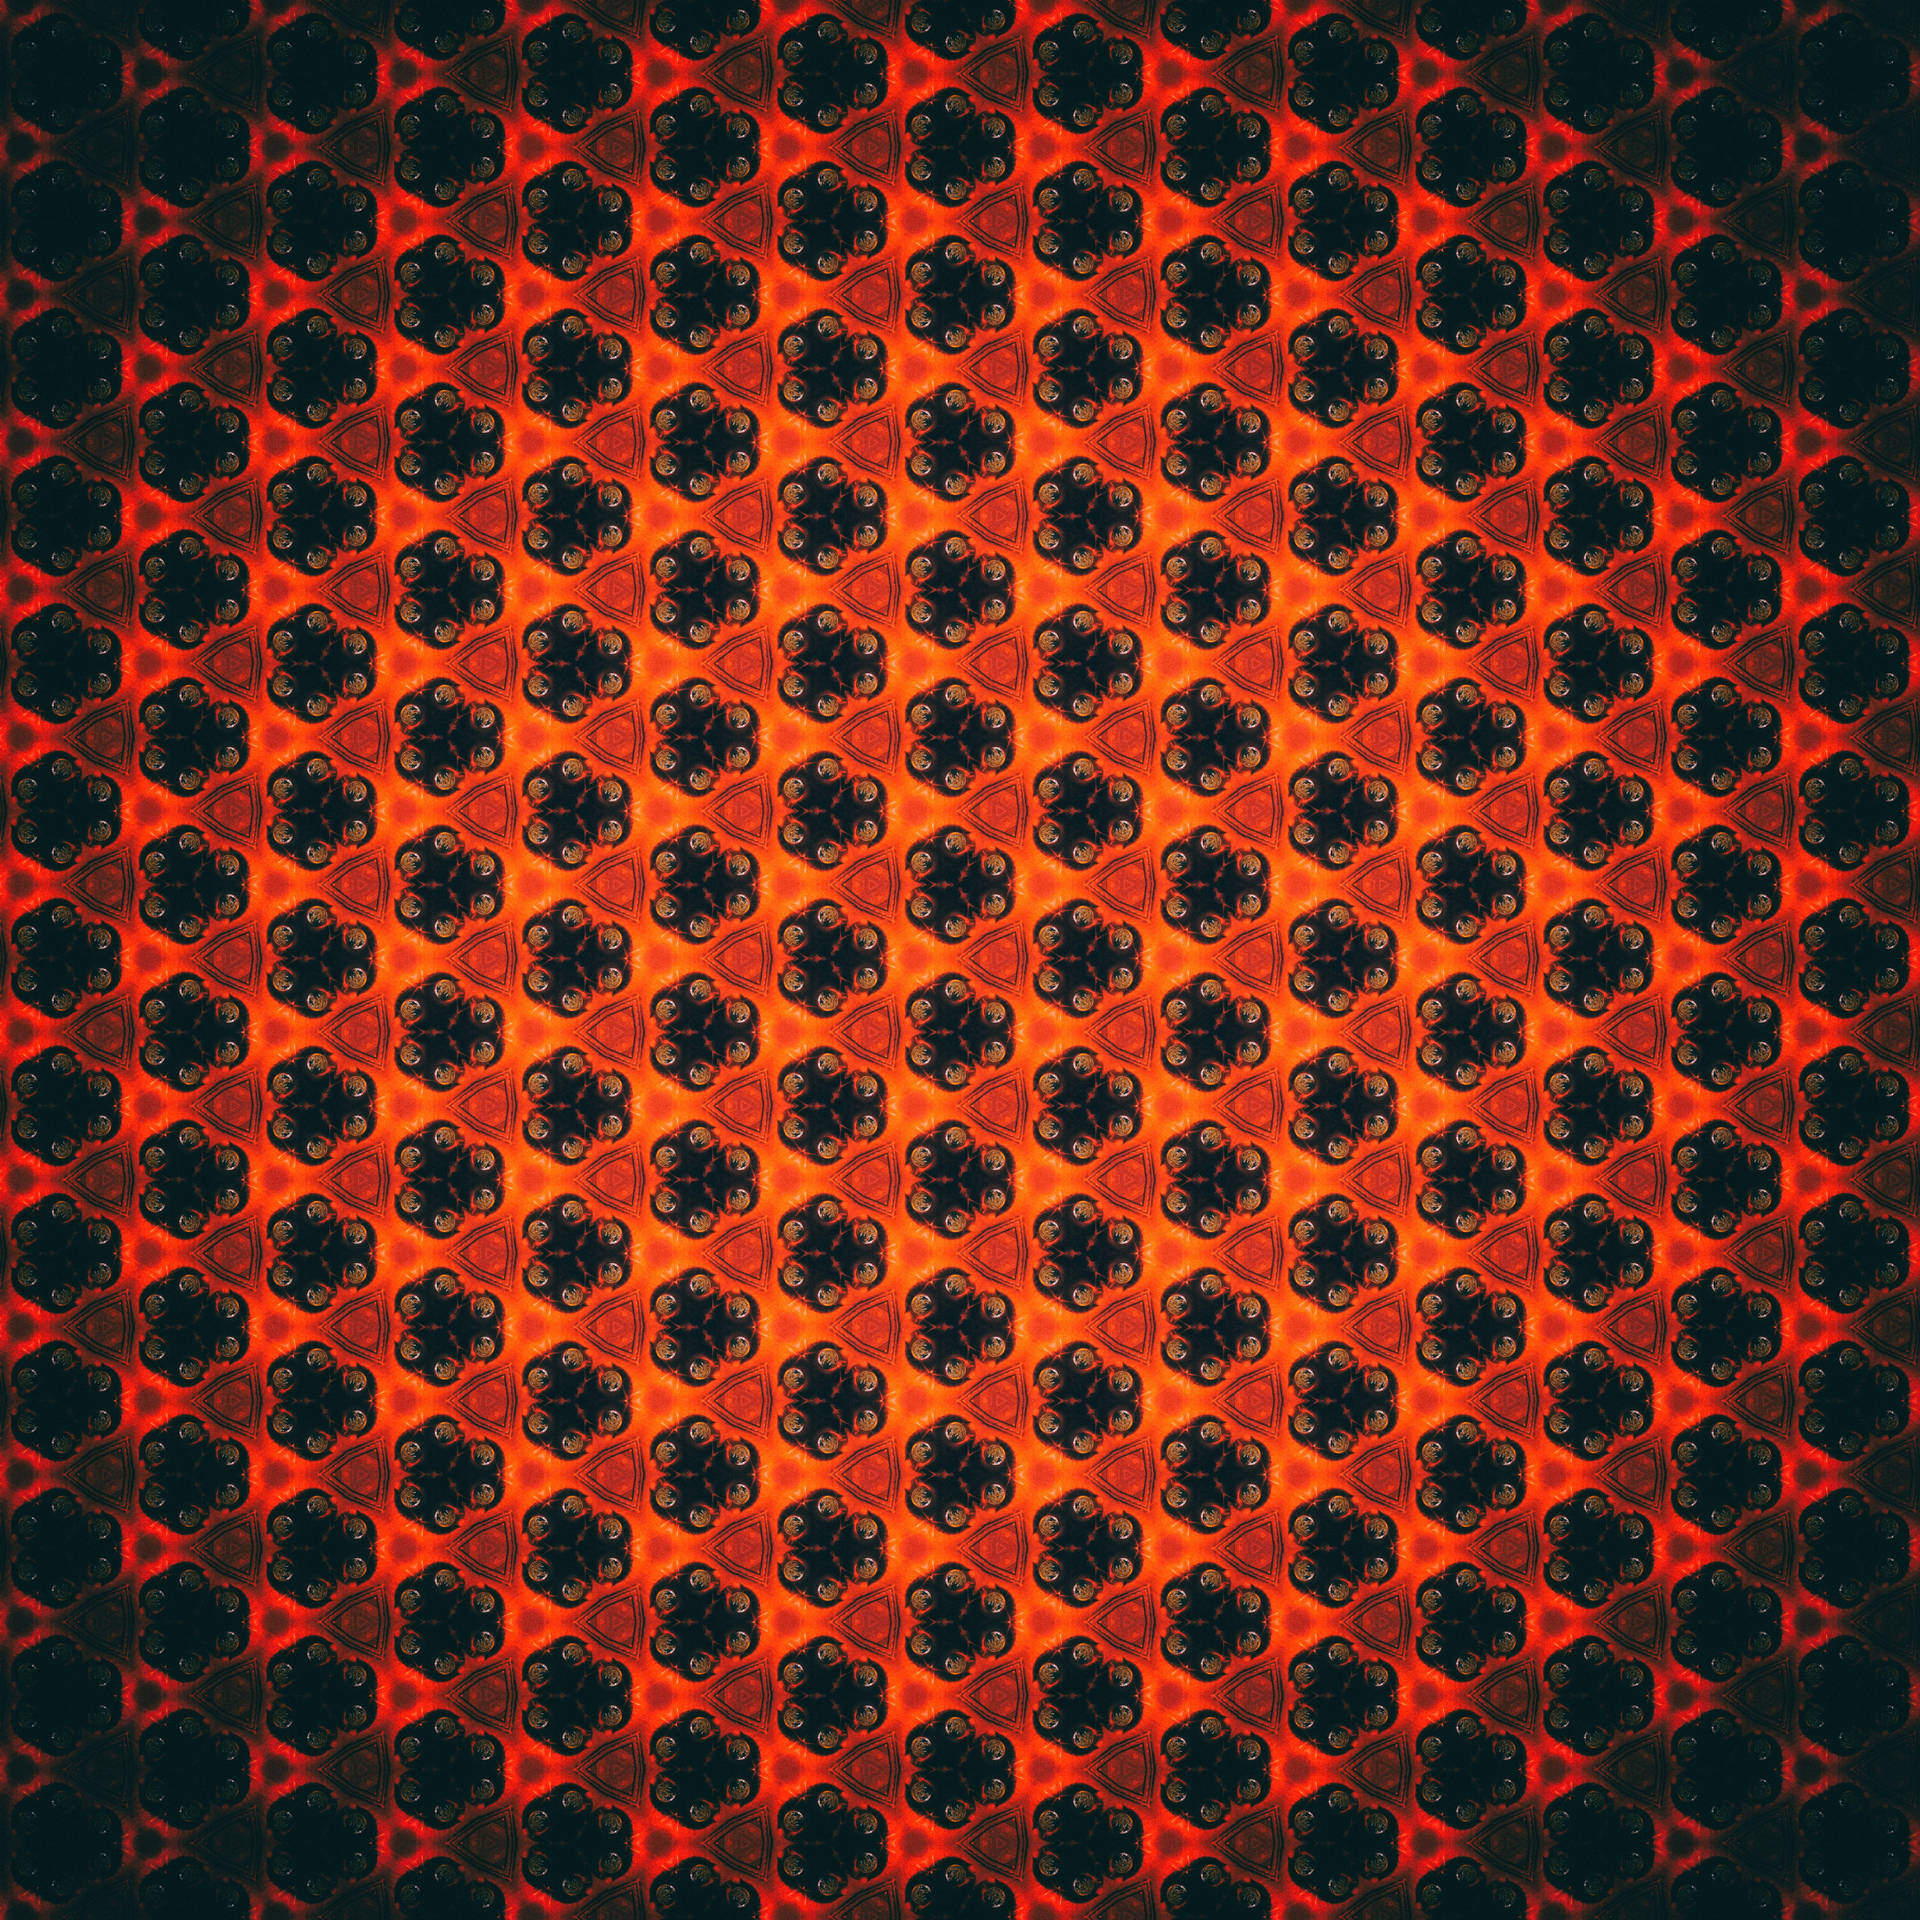 5000X5000 Pattern Wallpaper and Background